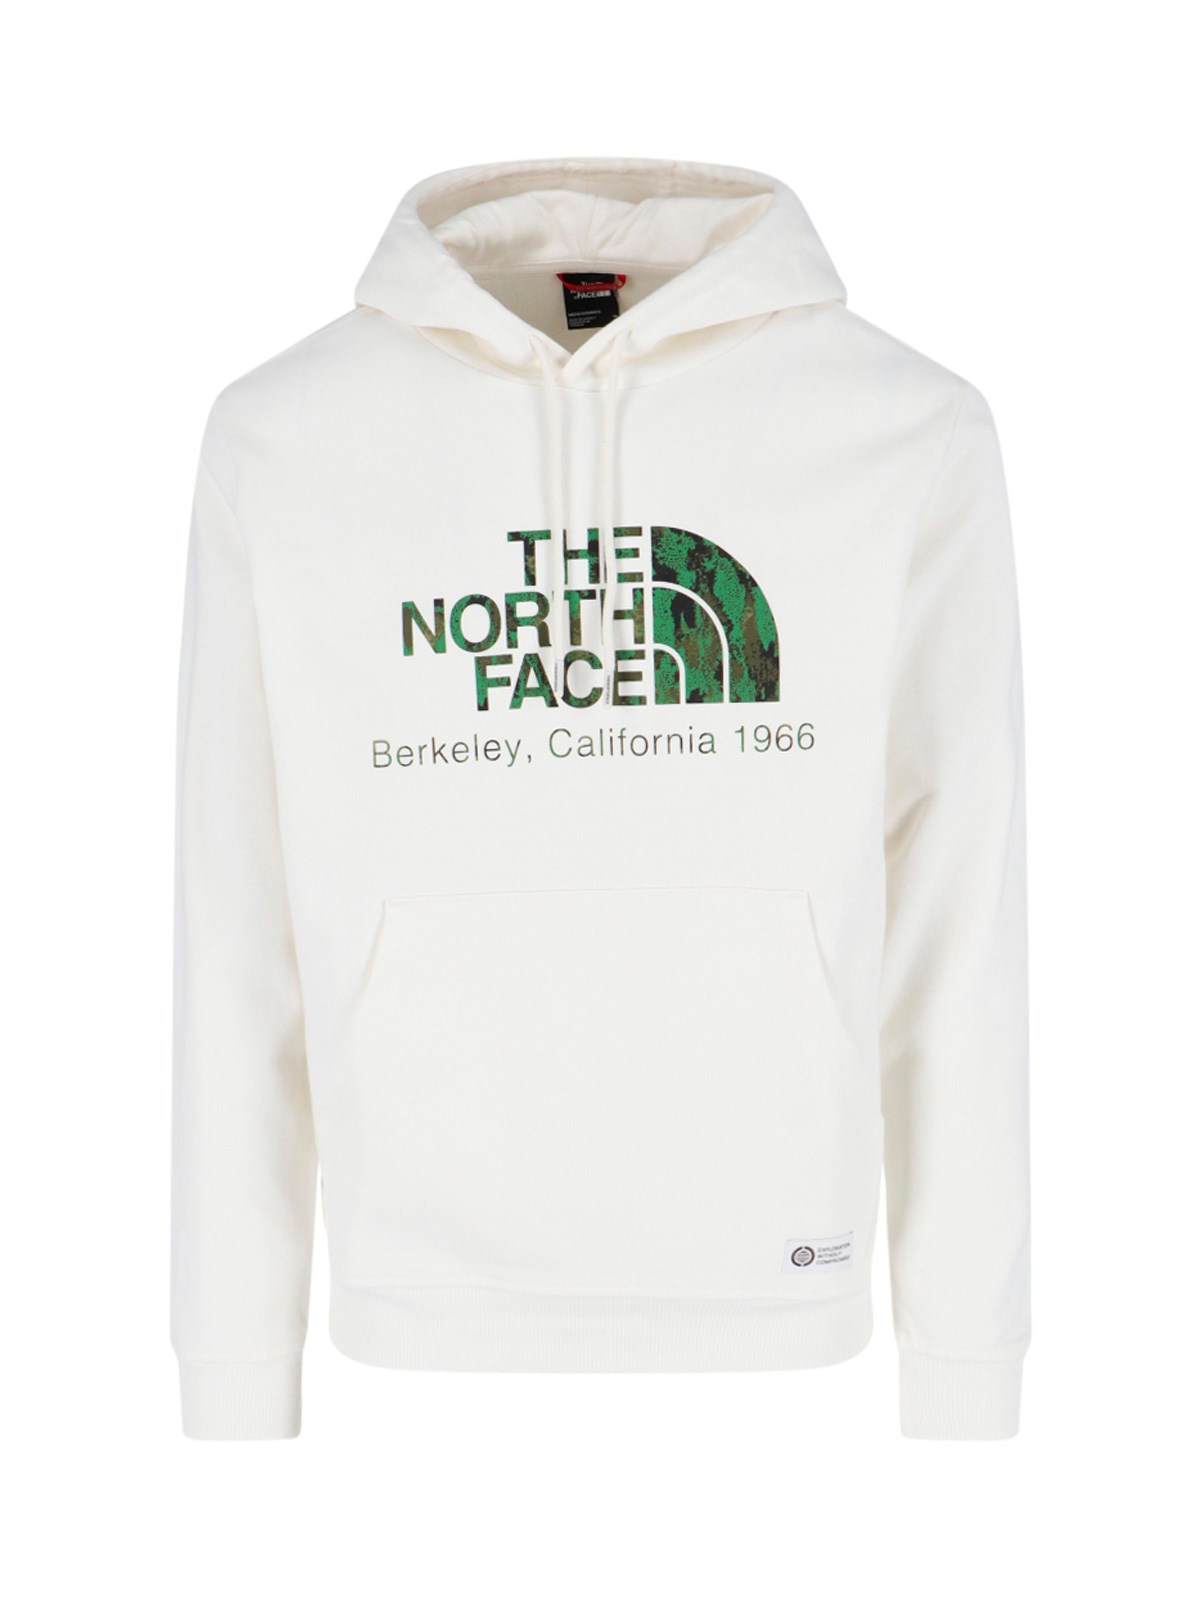 The North Face "berkeley California" Hoodie In White